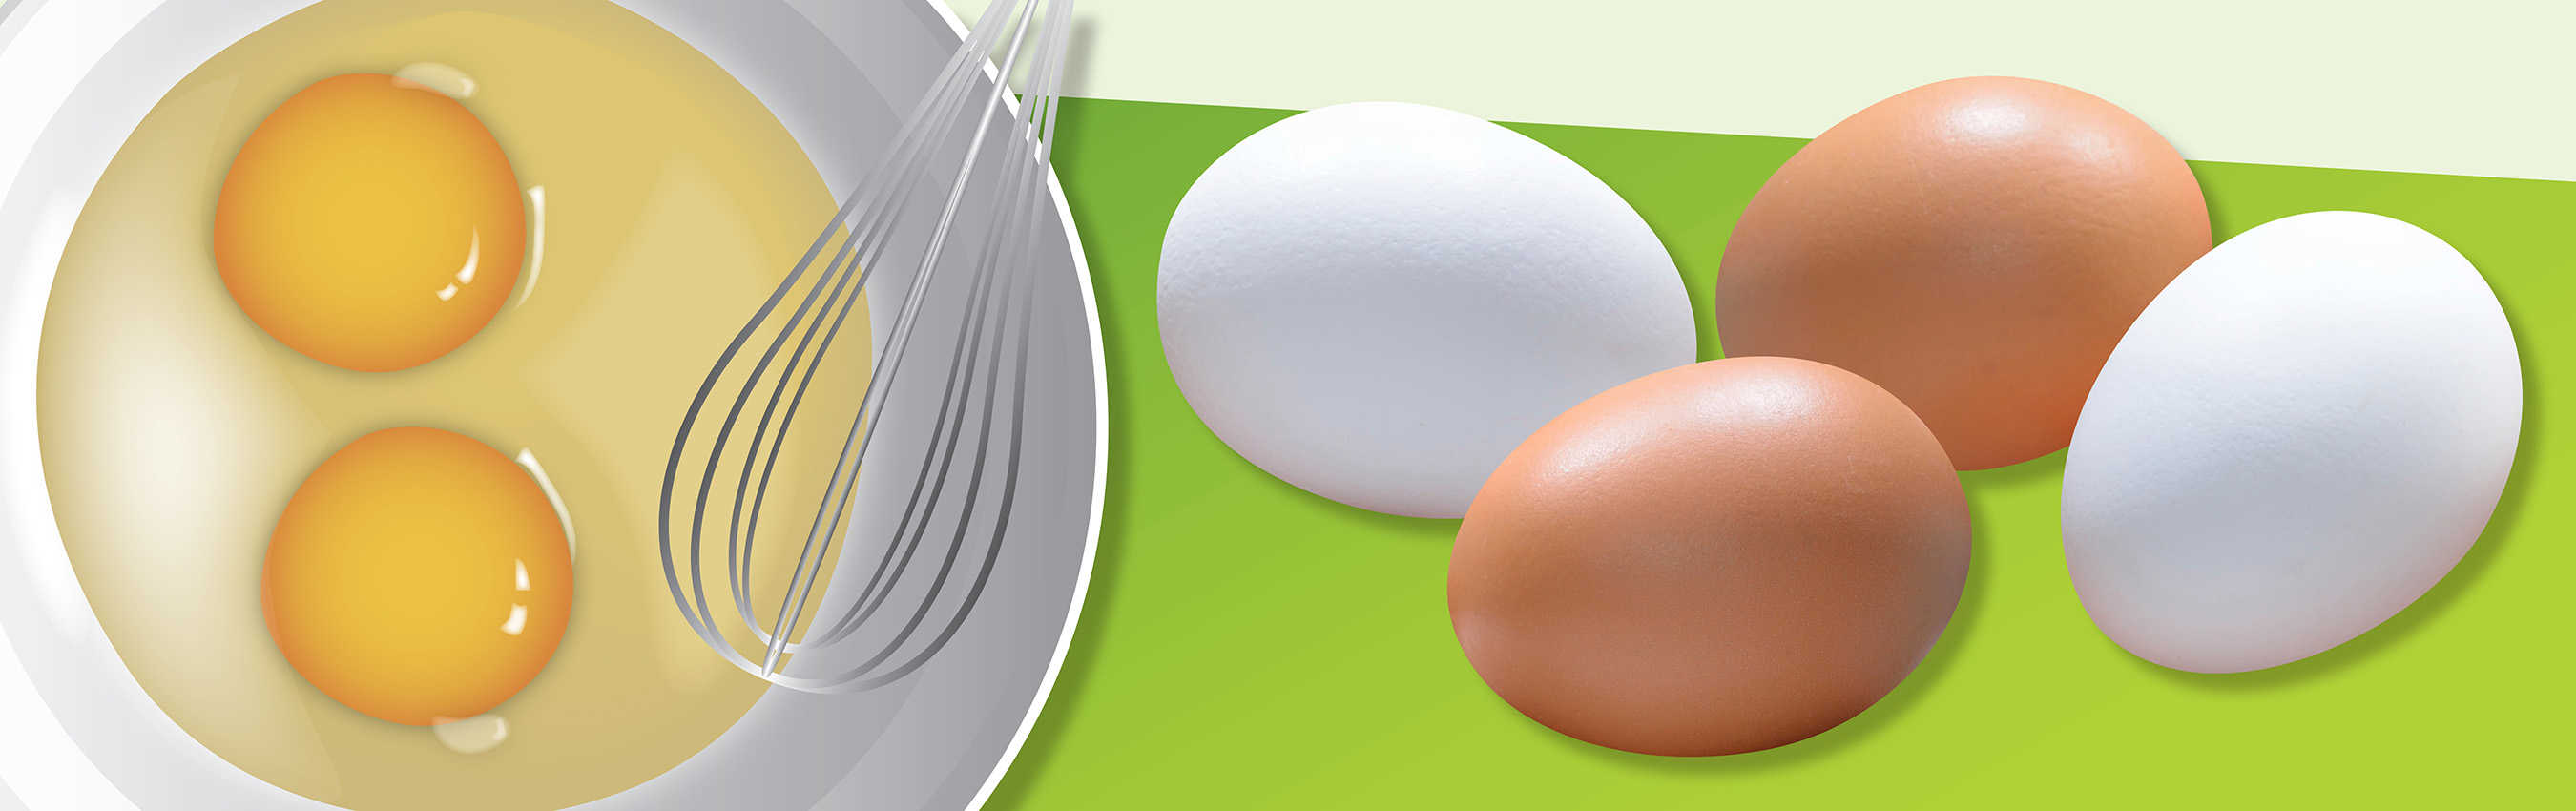 When it comes to eggs, keep in mind these 5 tips